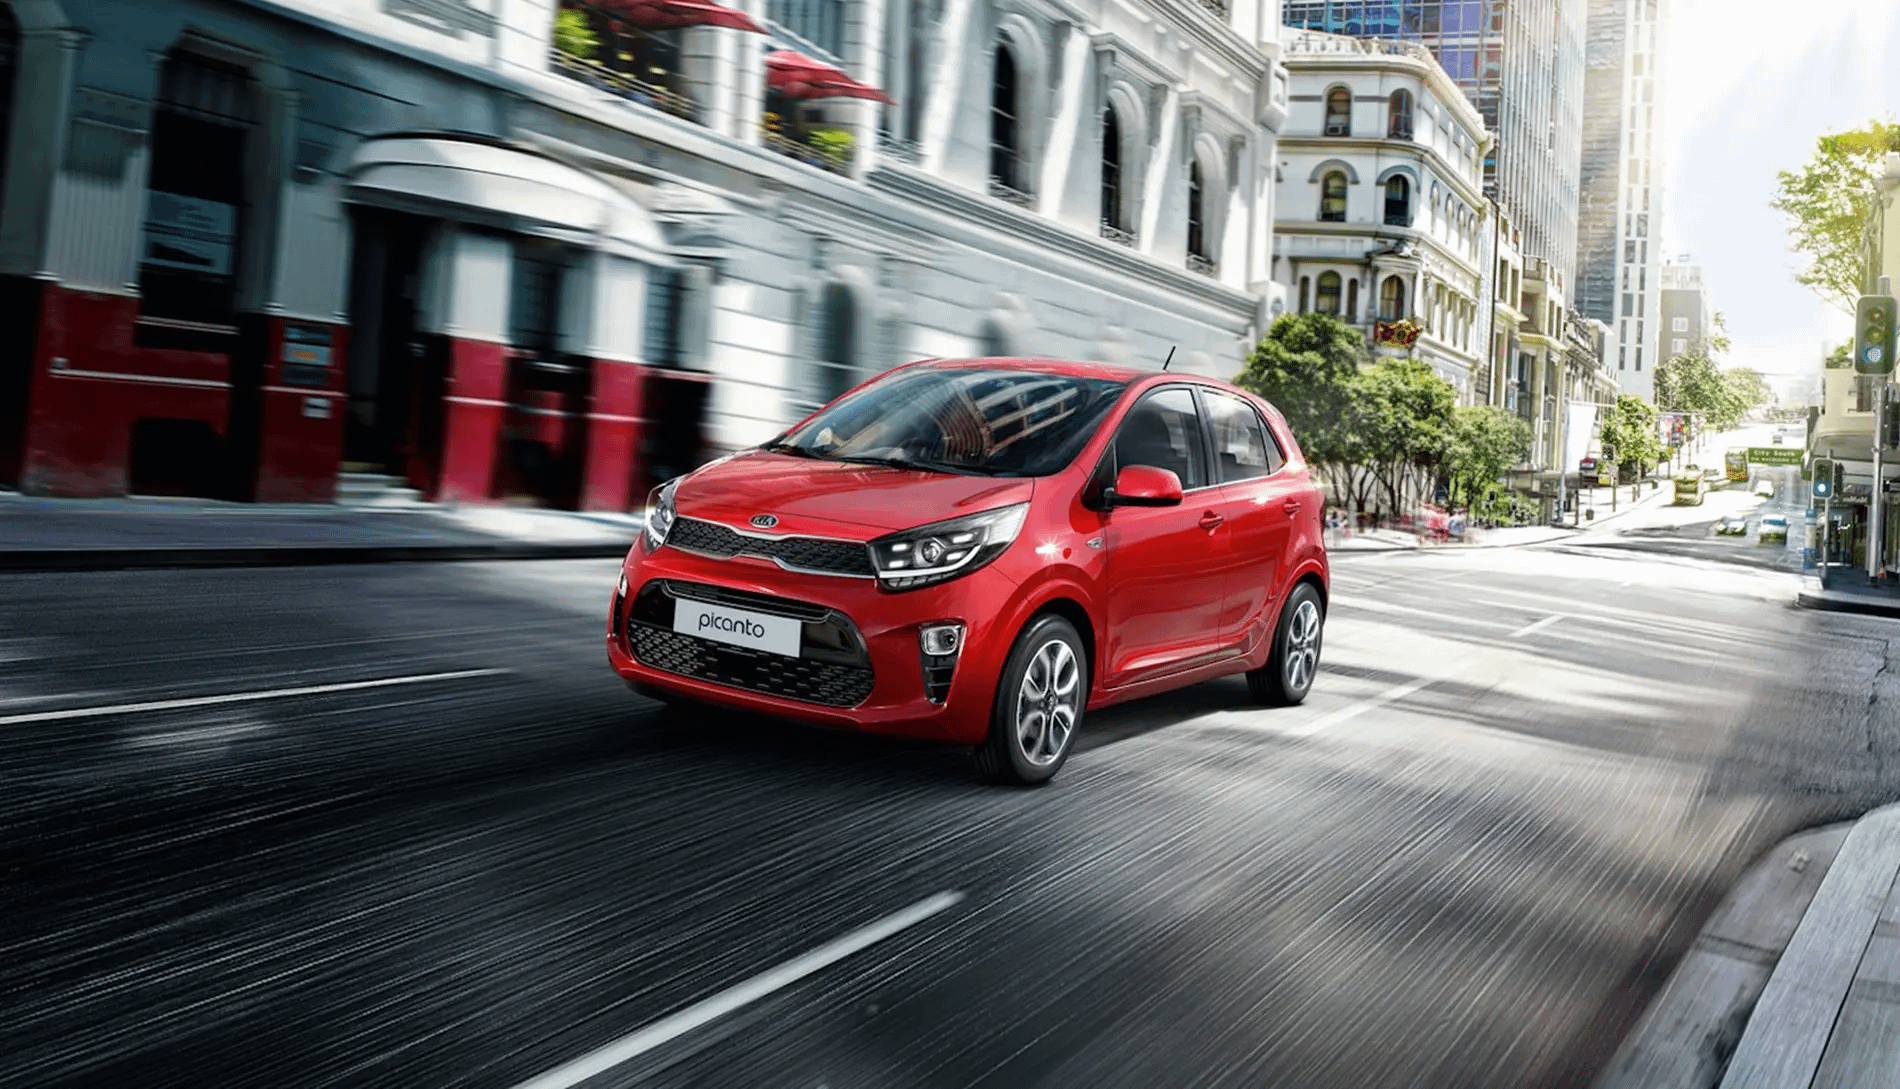 KIA Picanto: Features, Cost, Motorway Driving & More